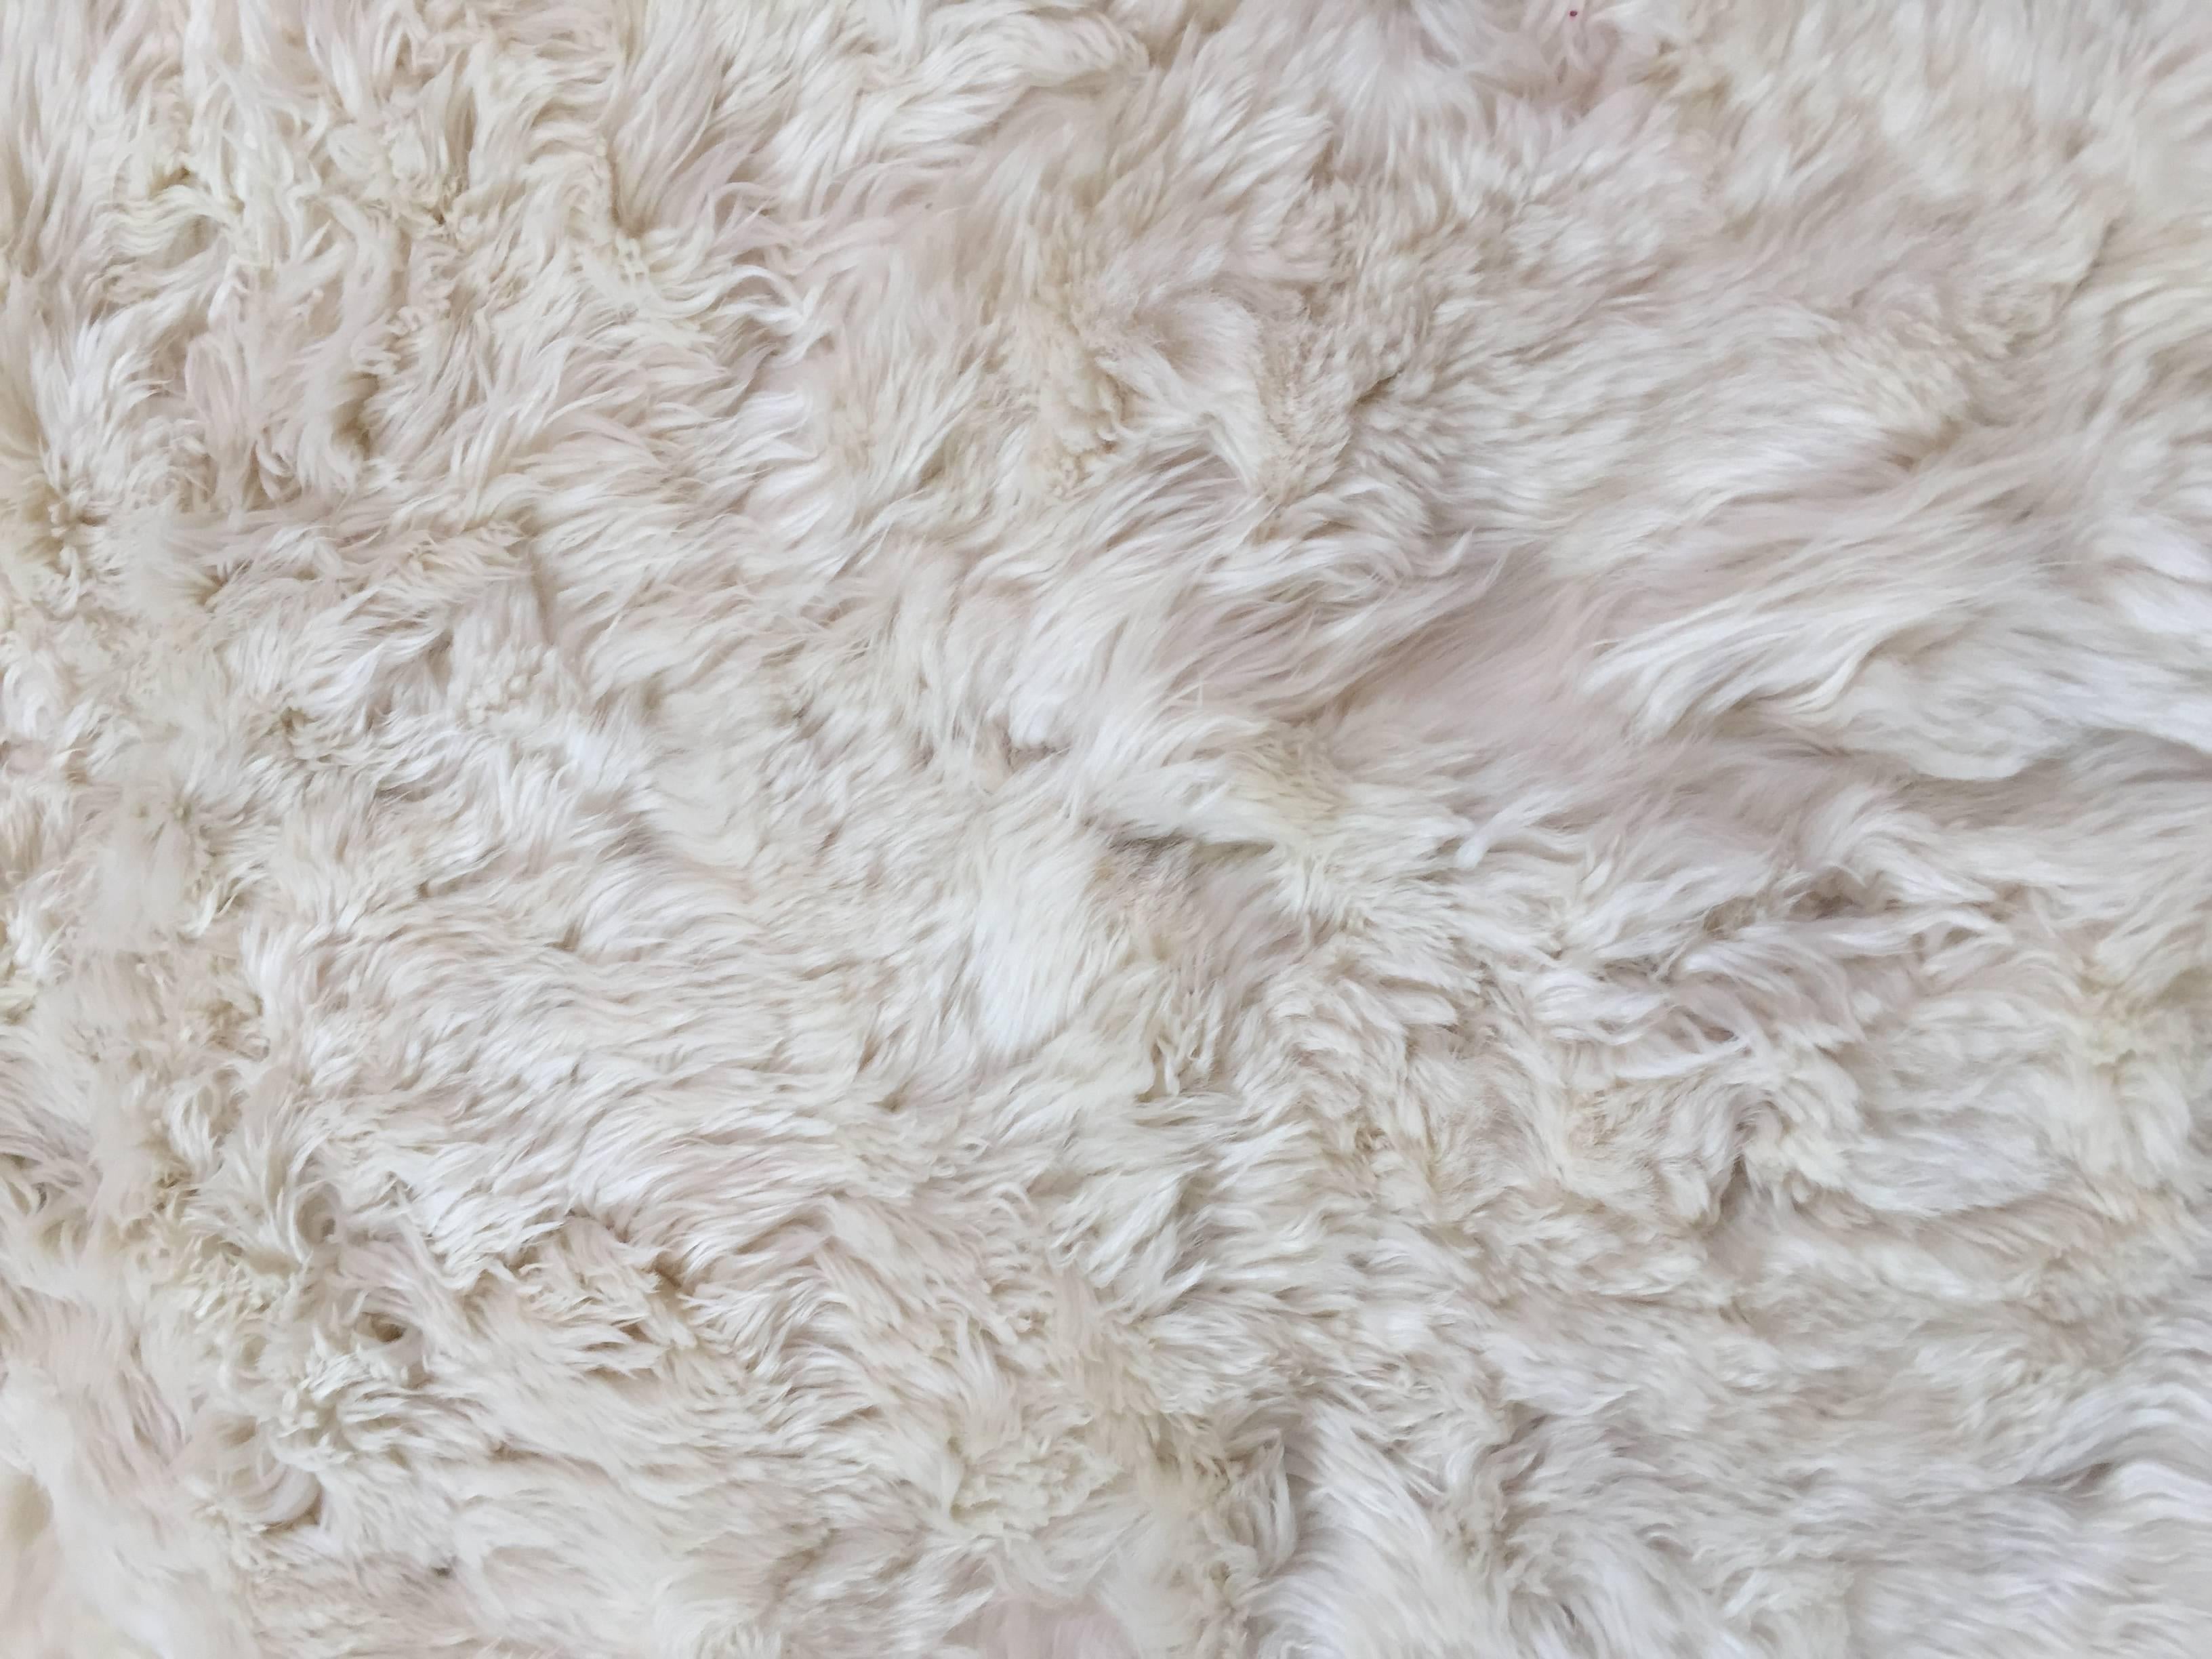 New Zealand 1970s White Fluffy Sheep Skin Bed Throw or Rug For Sale